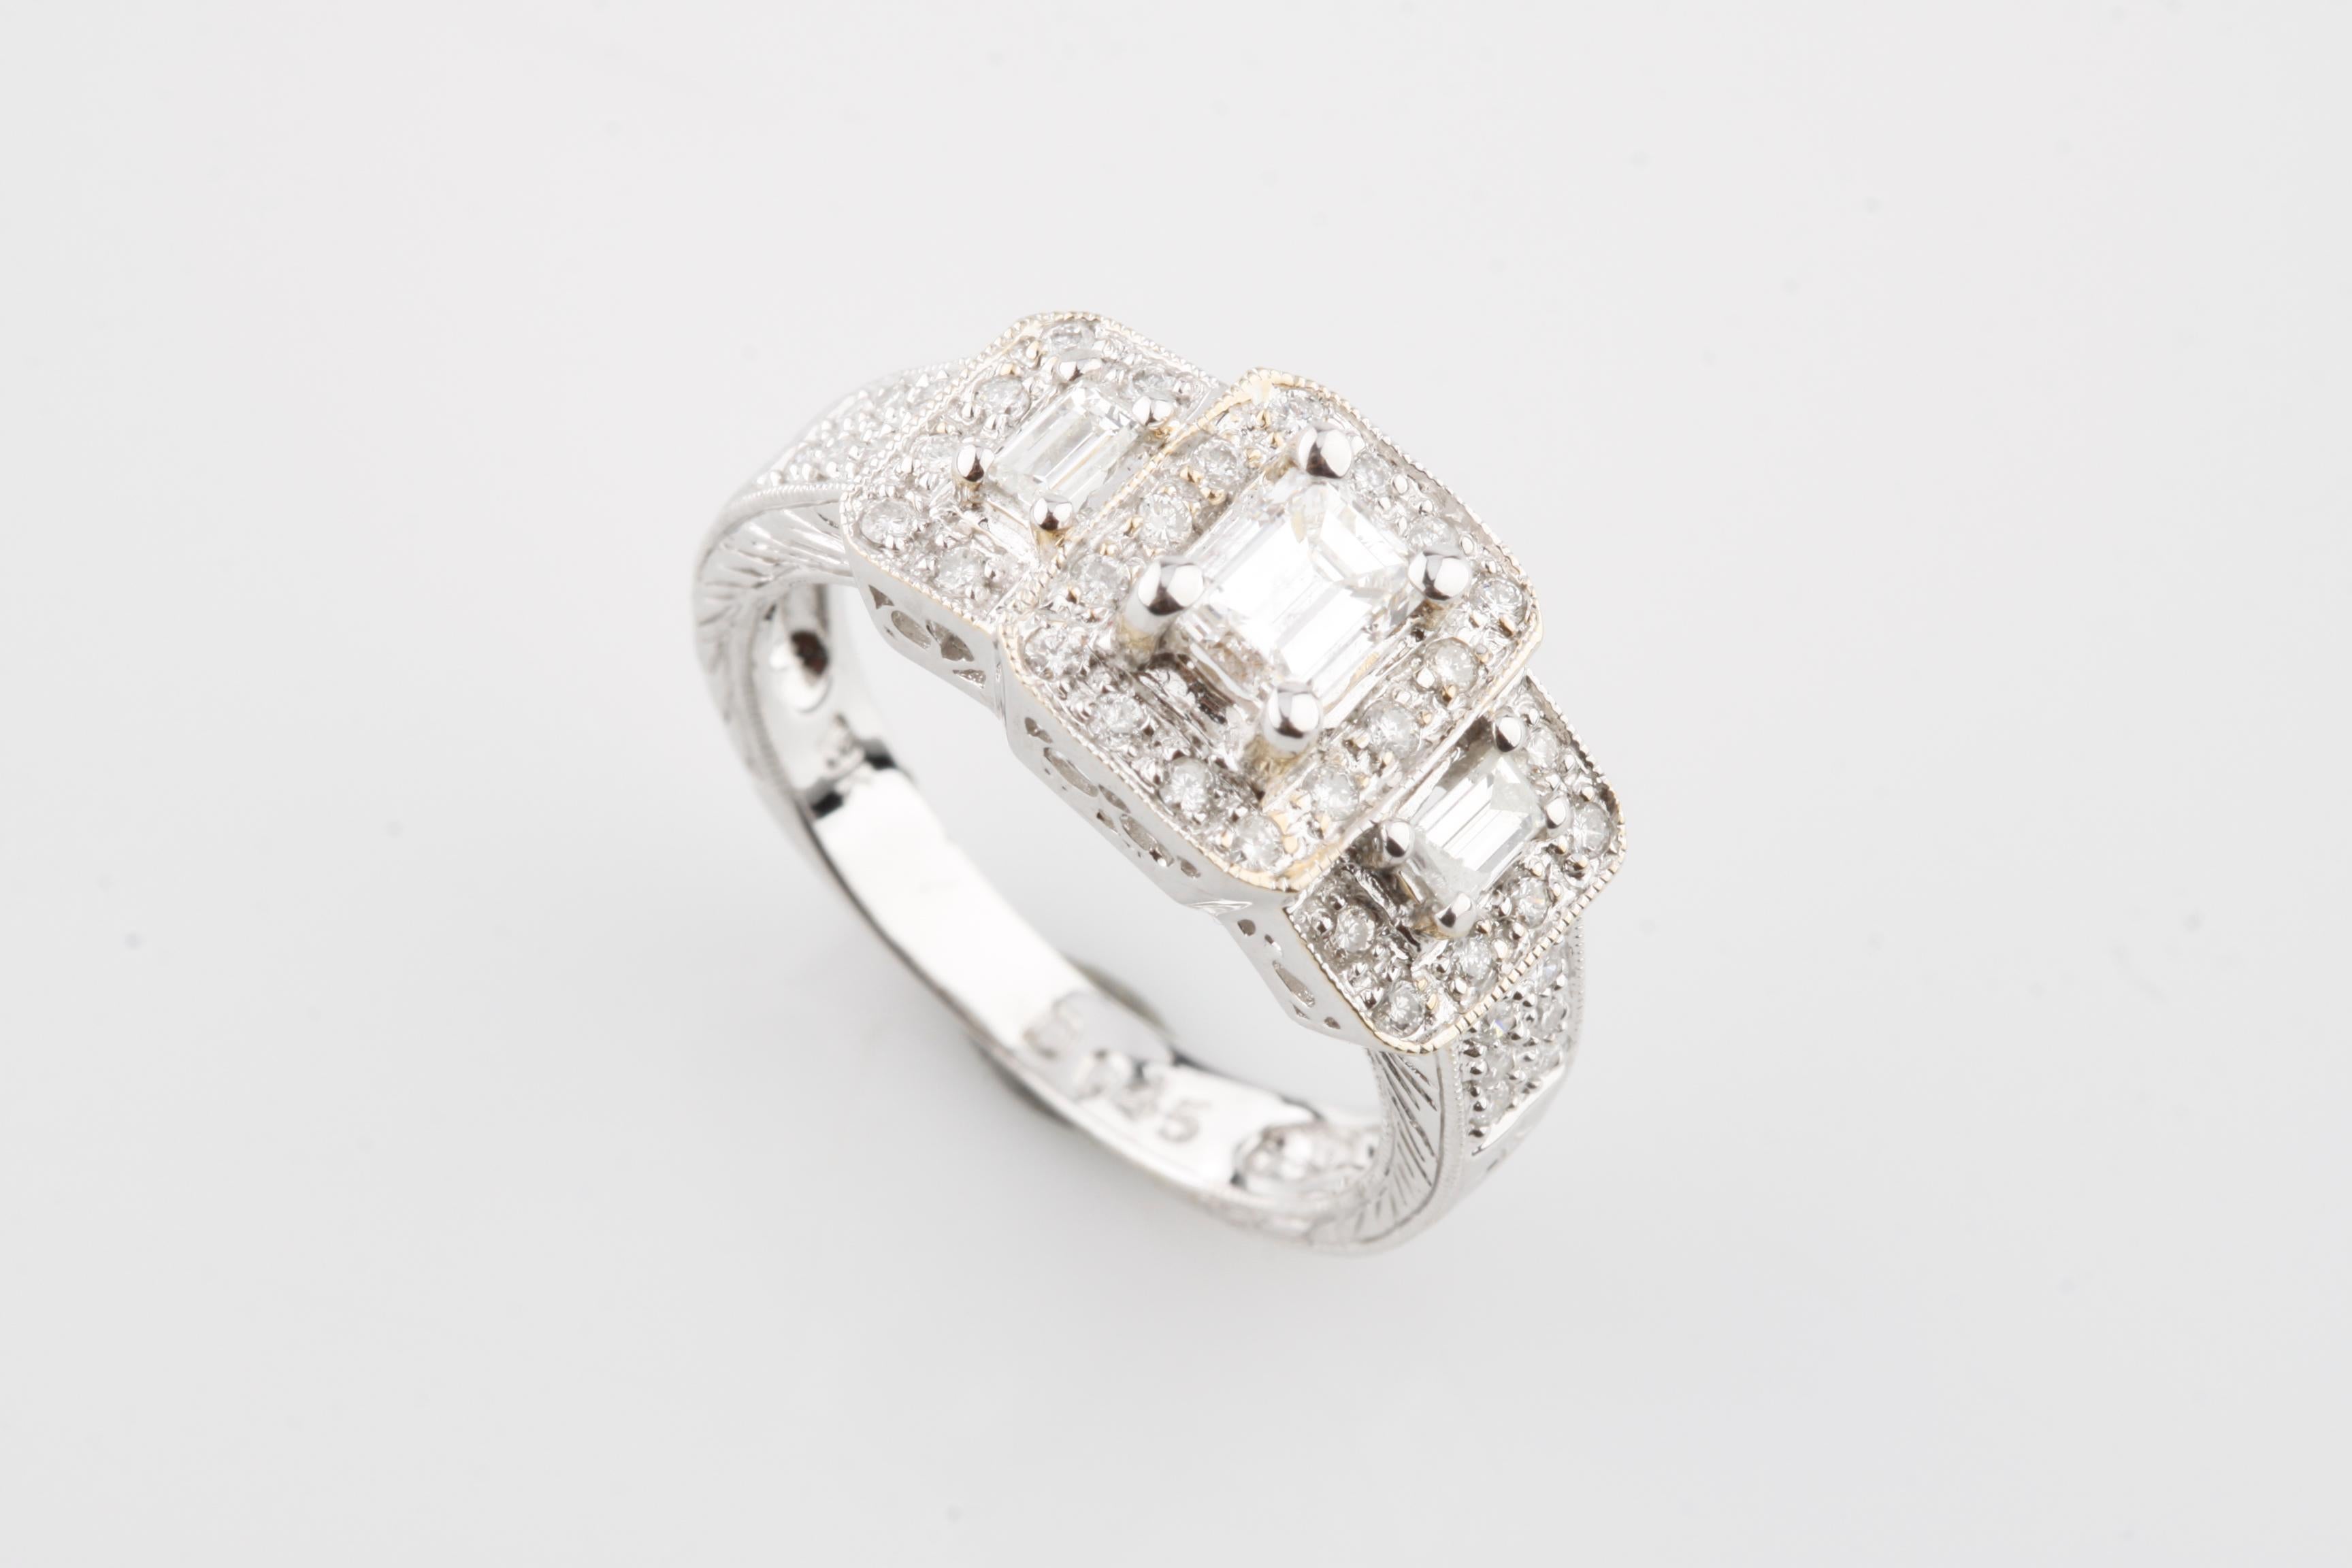 One electronically tested 18KT white gold ladies cast diamond unity ring.
Condition is very good.
Size 6.75
Bright & patterened finish, with a milgrain detailing.
Identified with markings of 